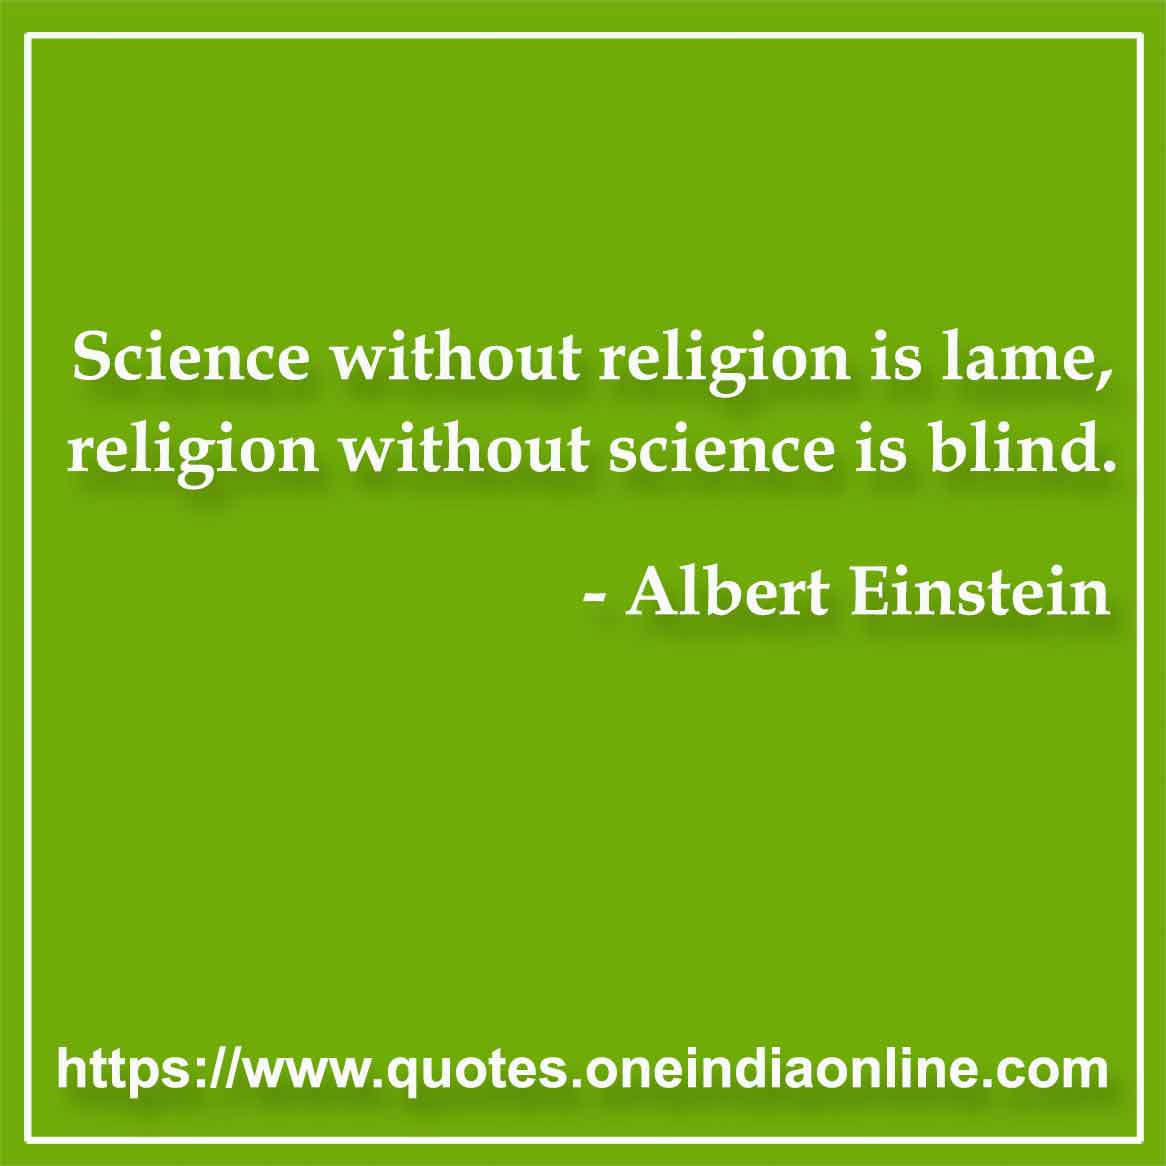 Science without religion is lame, religion without science is blind.

- Religious Quotes by Albert Einstein 